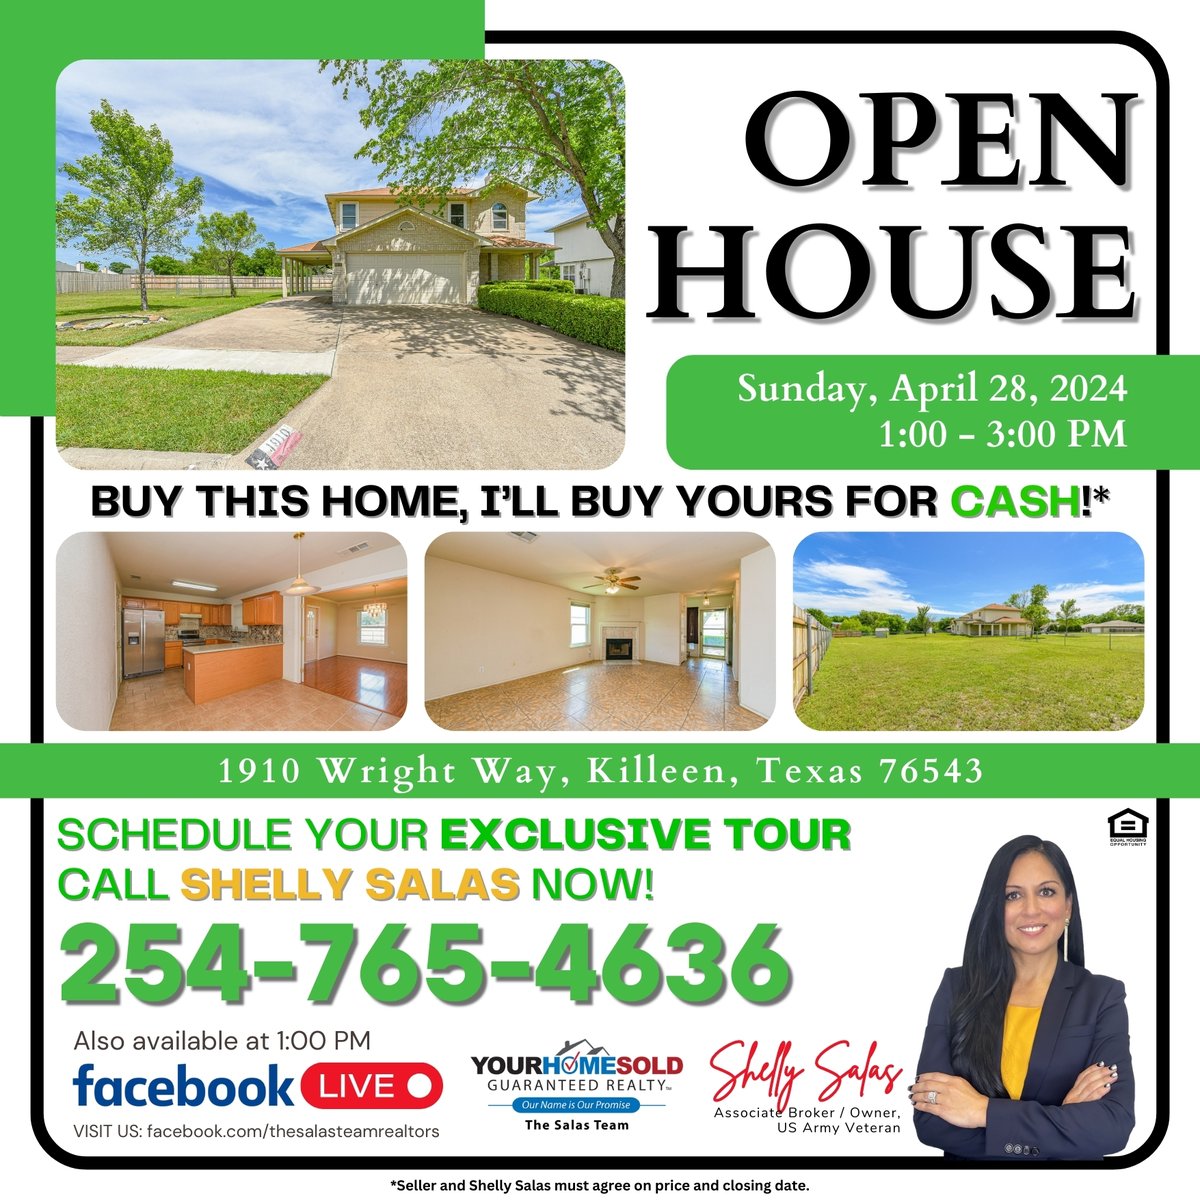 OPEN HOUSE
1910 Wright Way, Killeen, TX 76543
Sunday, April 28th, 2024
1-3PM CST